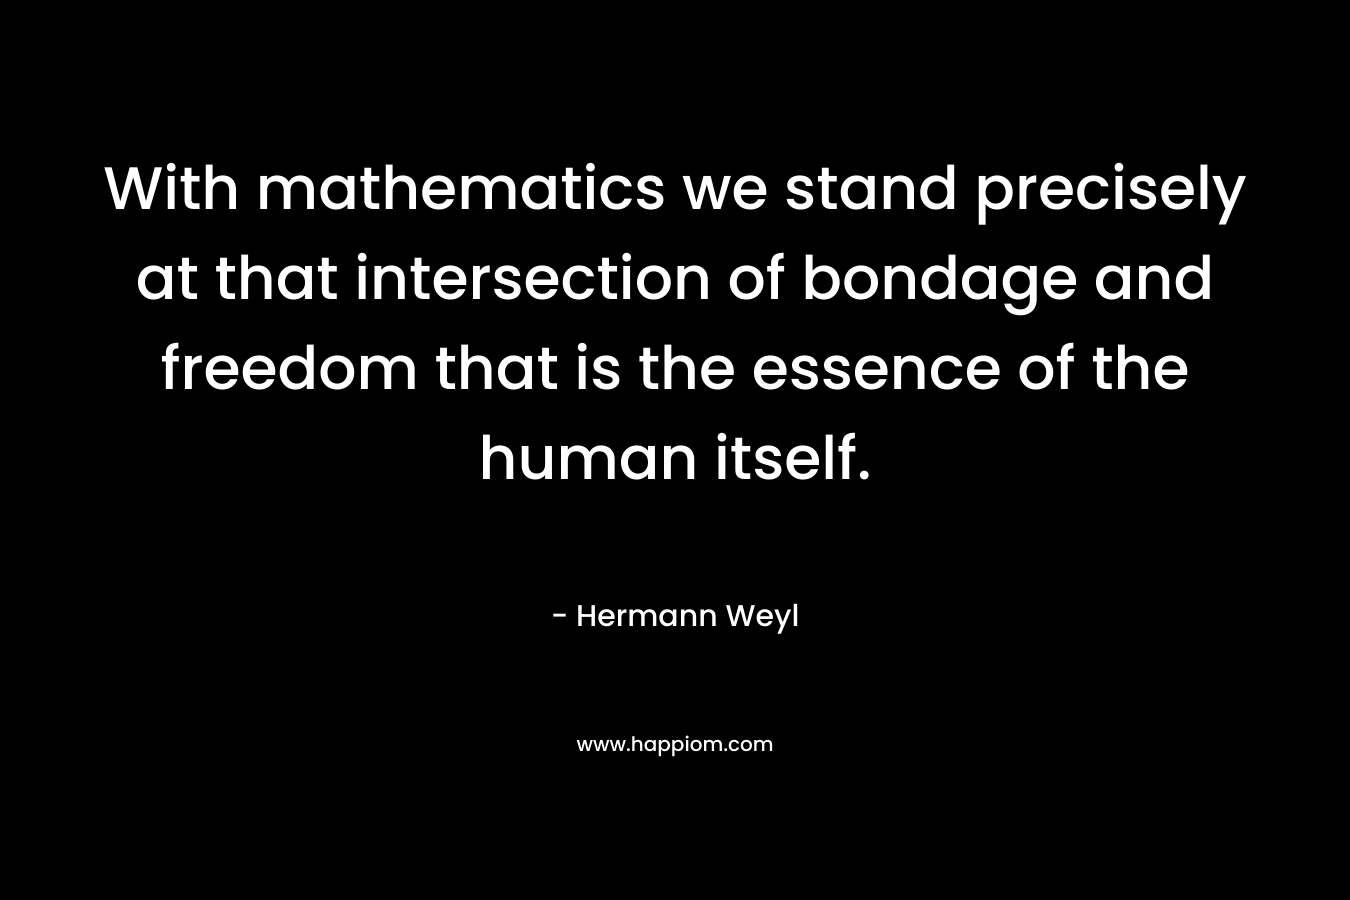 With mathematics we stand precisely at that intersection of bondage and freedom that is the essence of the human itself.